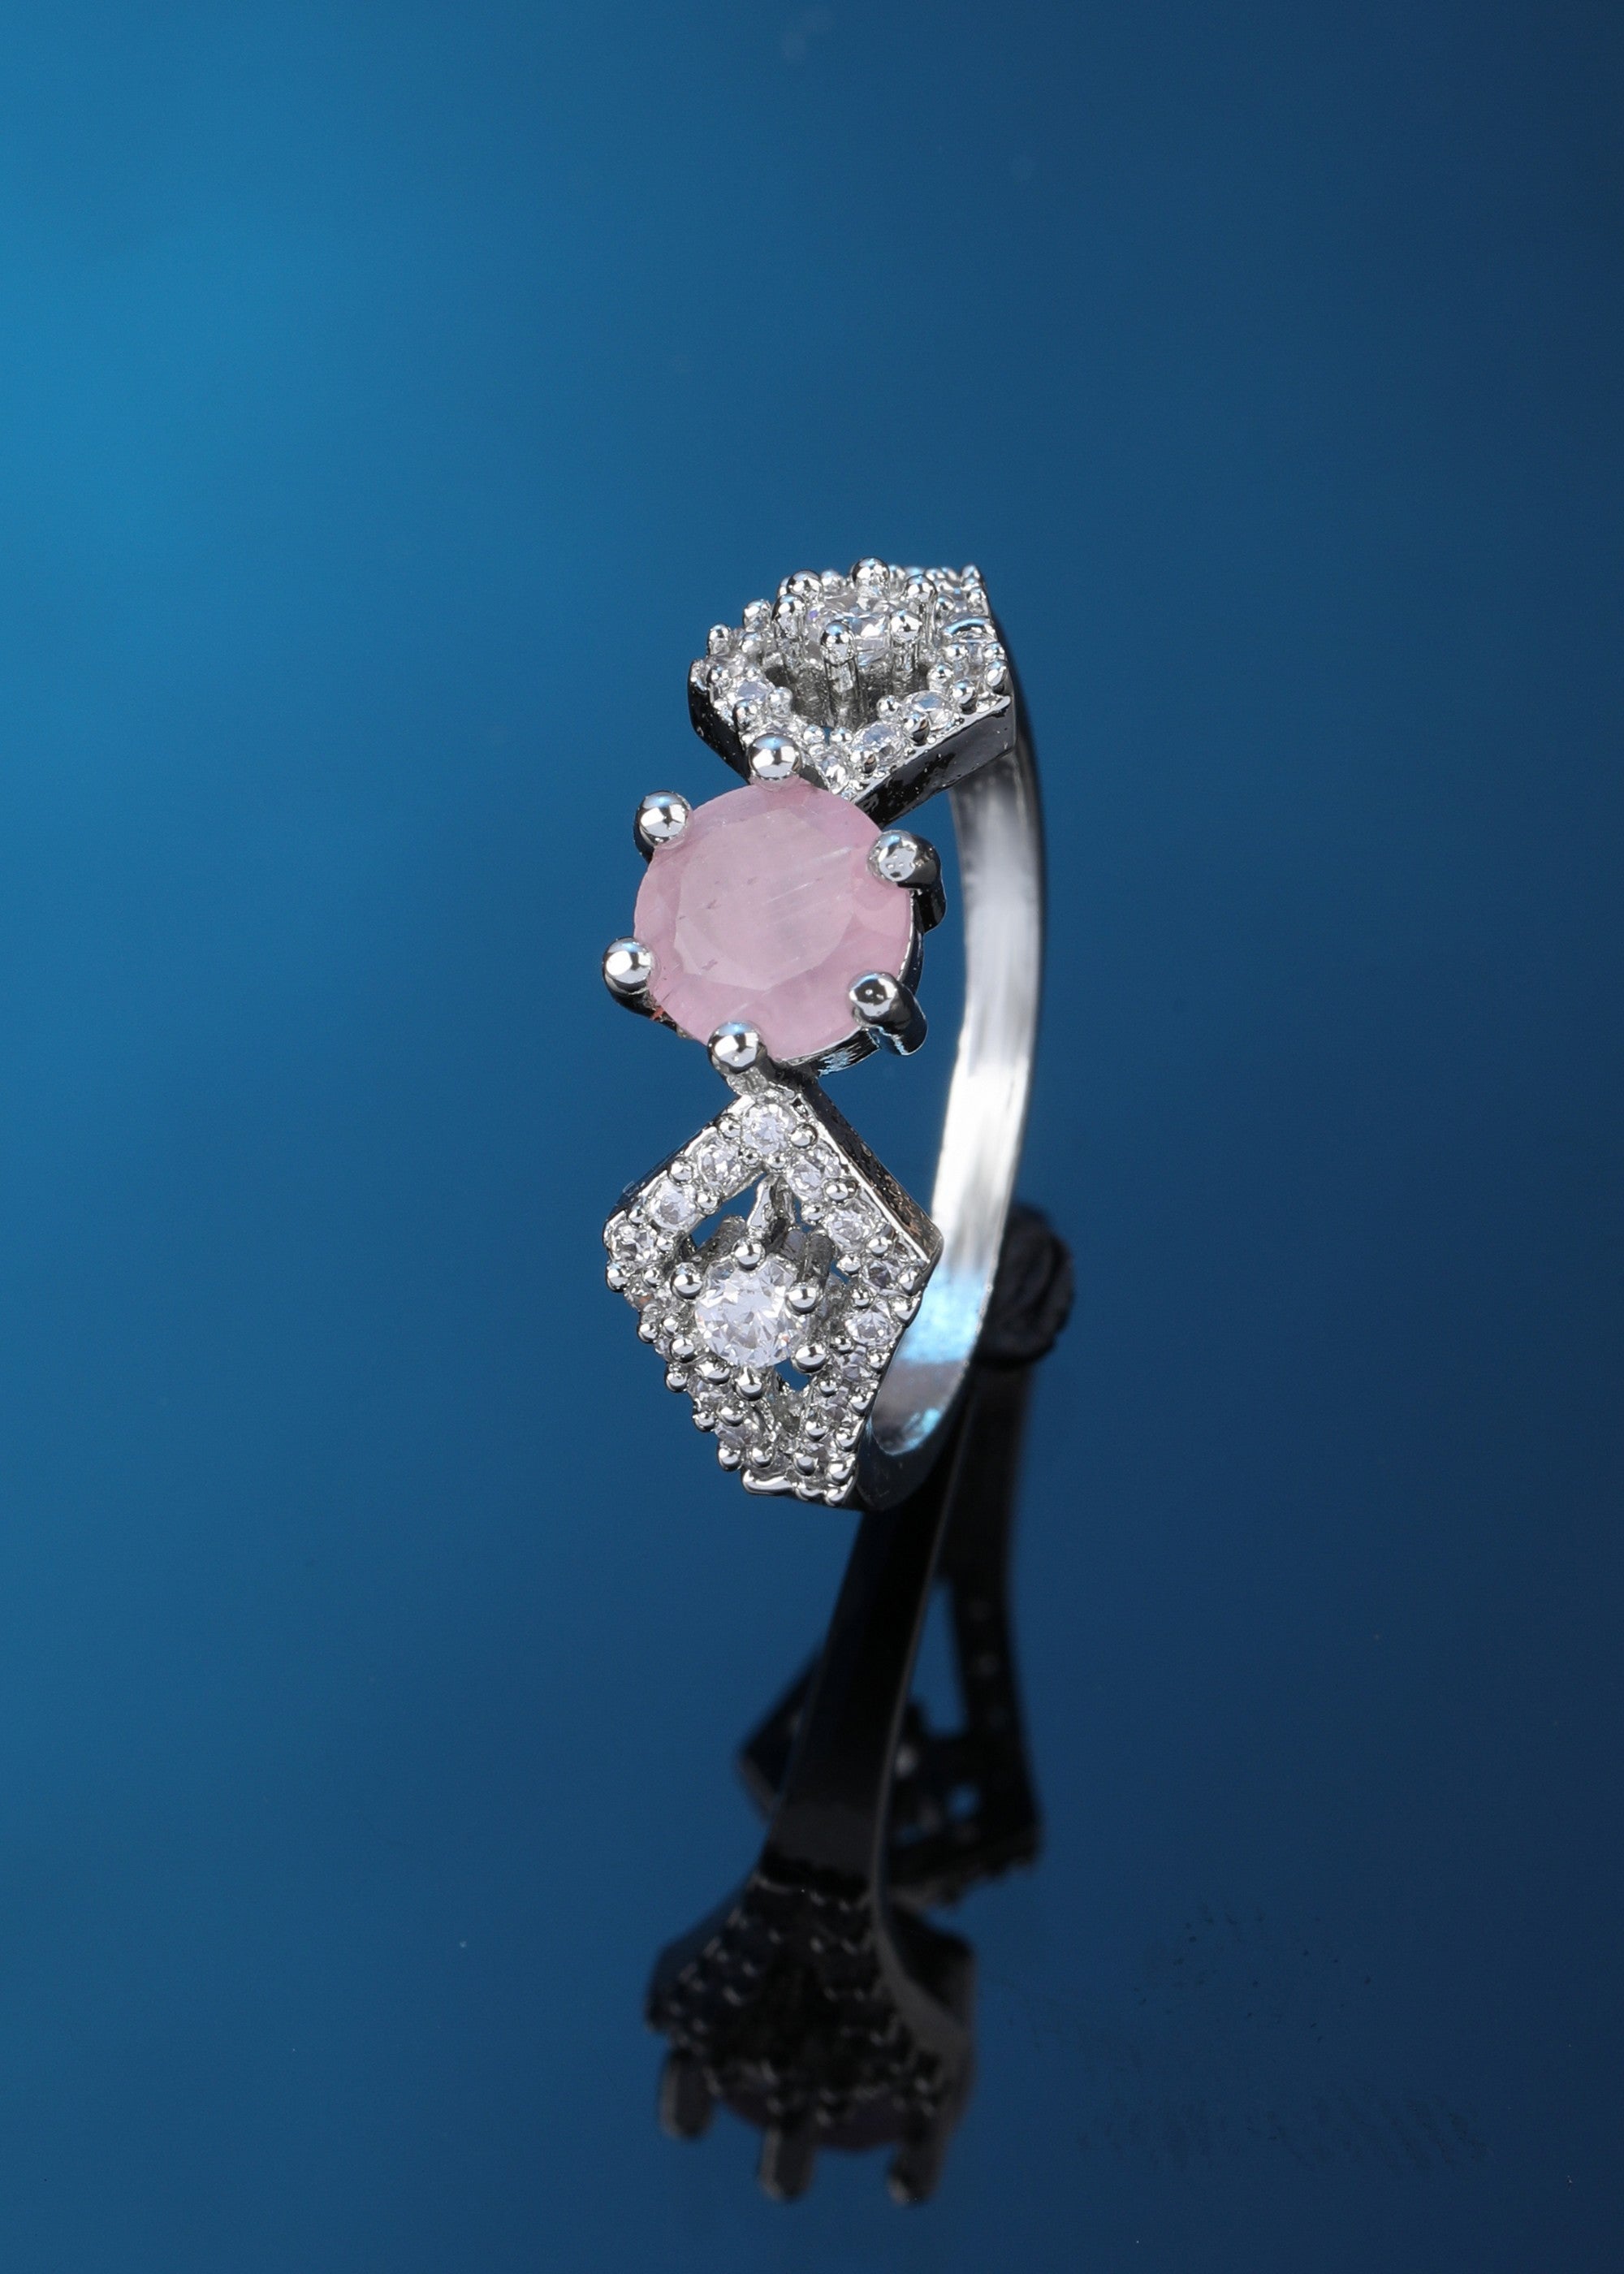 Silver-Plated & White and Pink AD Stone-Studded Ring